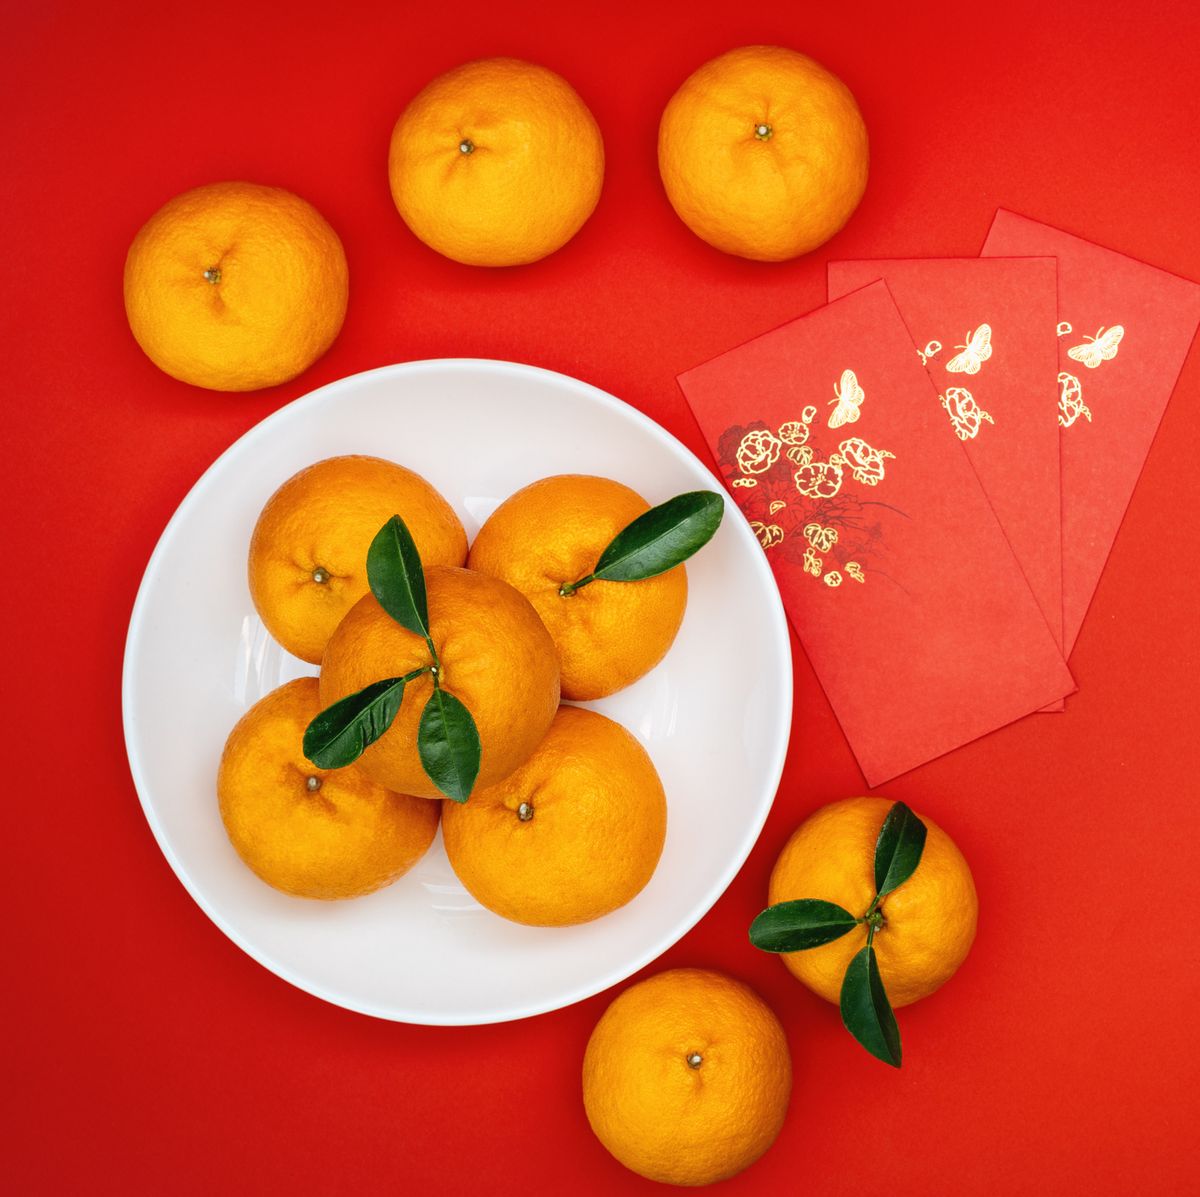 lunar new year decorations mandarin oranges and red envelopes on red background for chinese new year